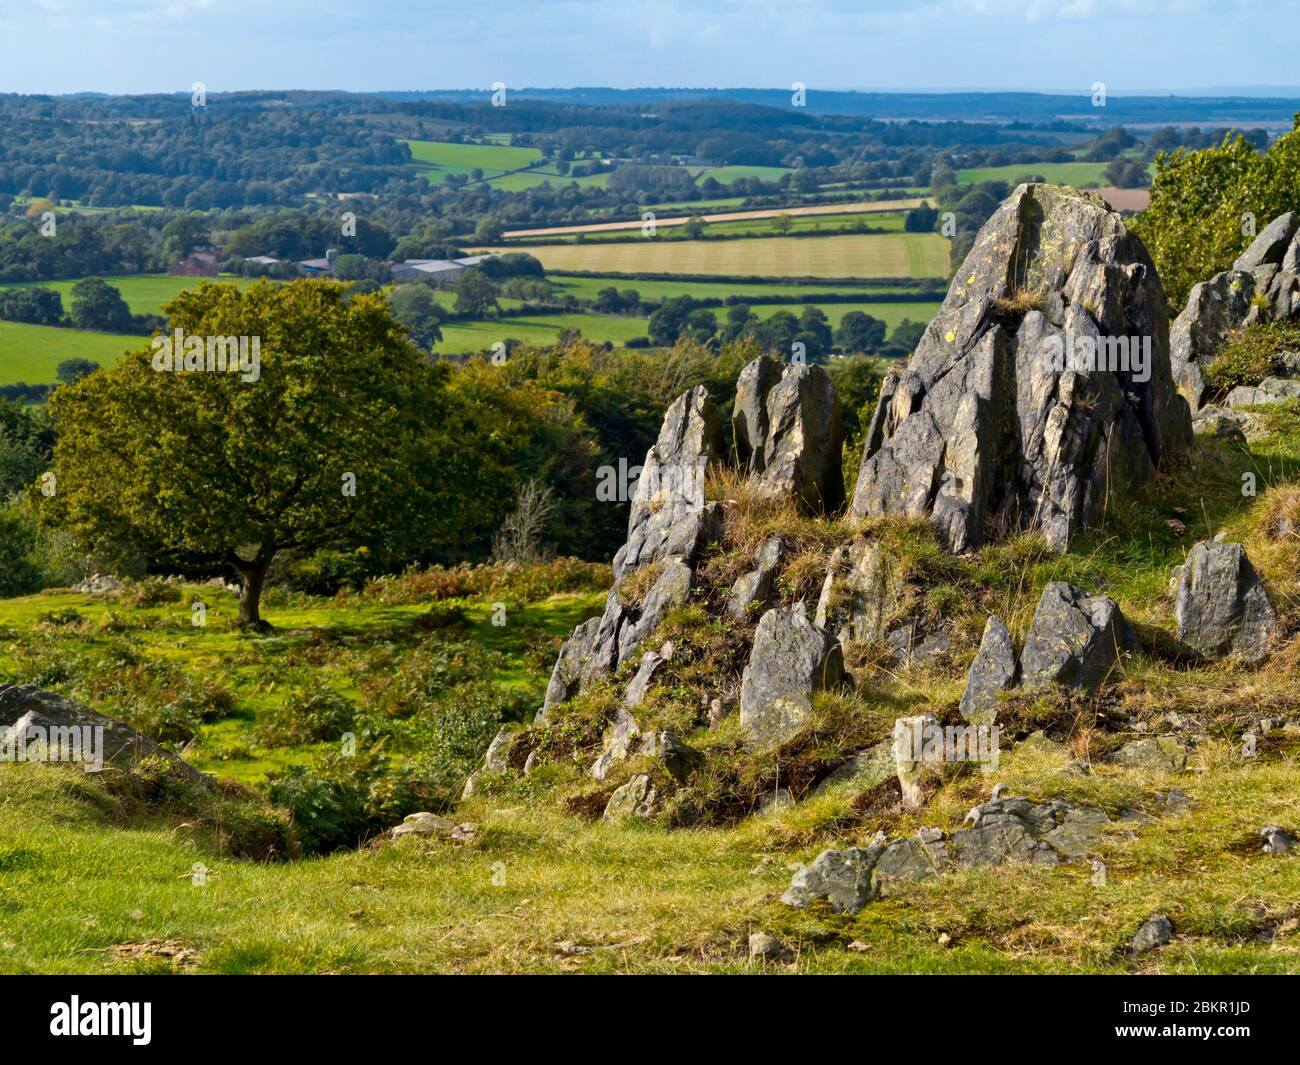 Igneous rocks at Beacon Hill Country Park near Loughborough in Leicestershire England UK Stock Photo